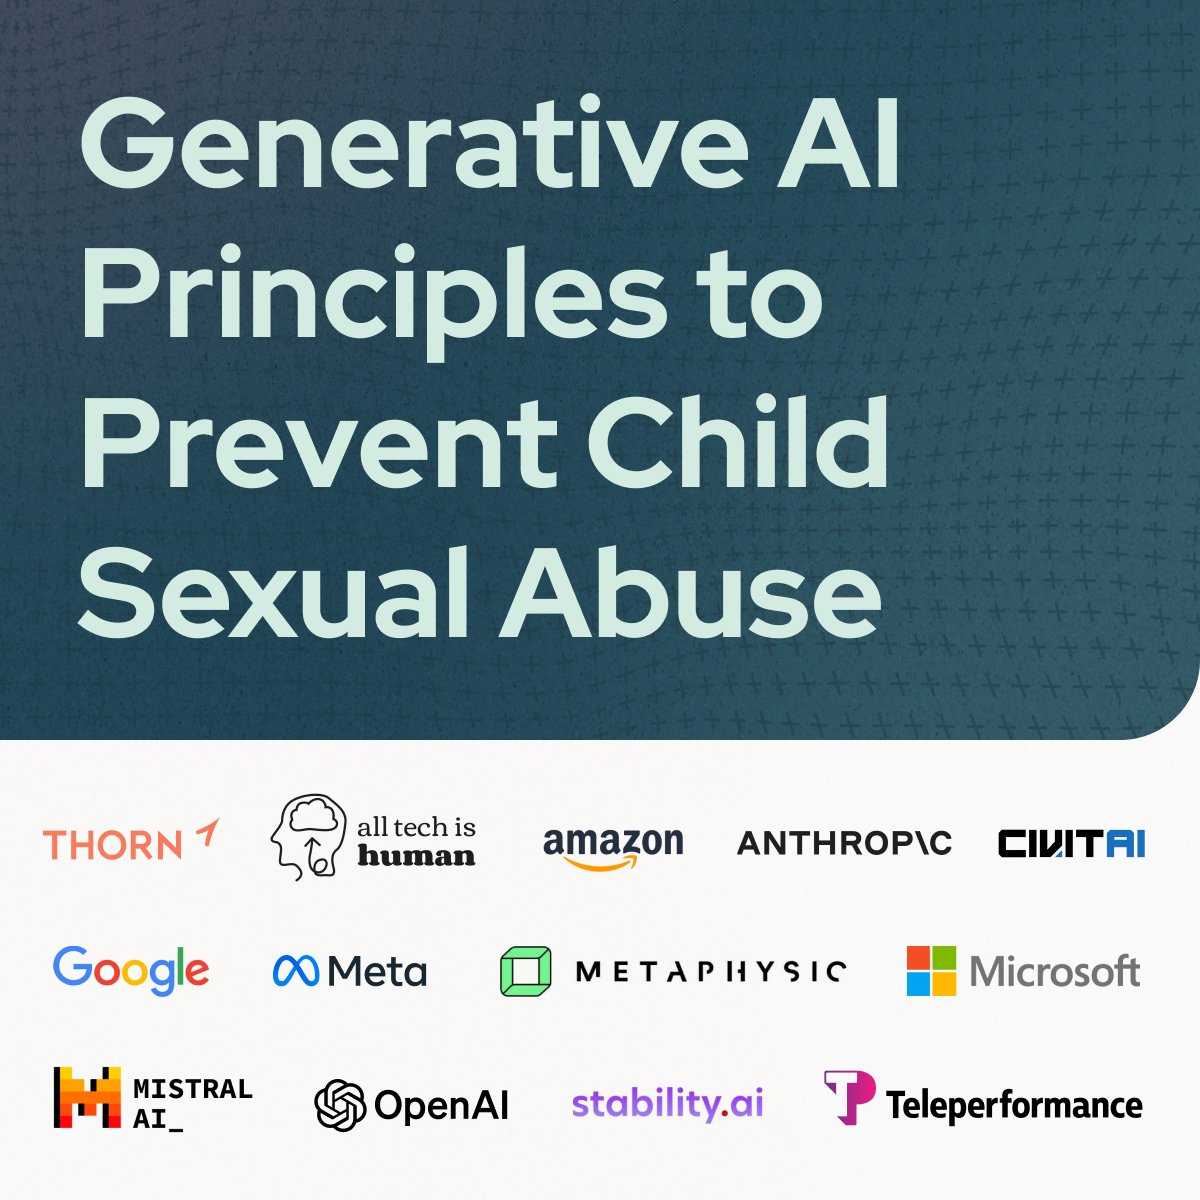 We commit to @thorn and @AllTechIsHuman's Safety by Design principles to ensure child safety is prioritized in the development and deployment of AI tools.